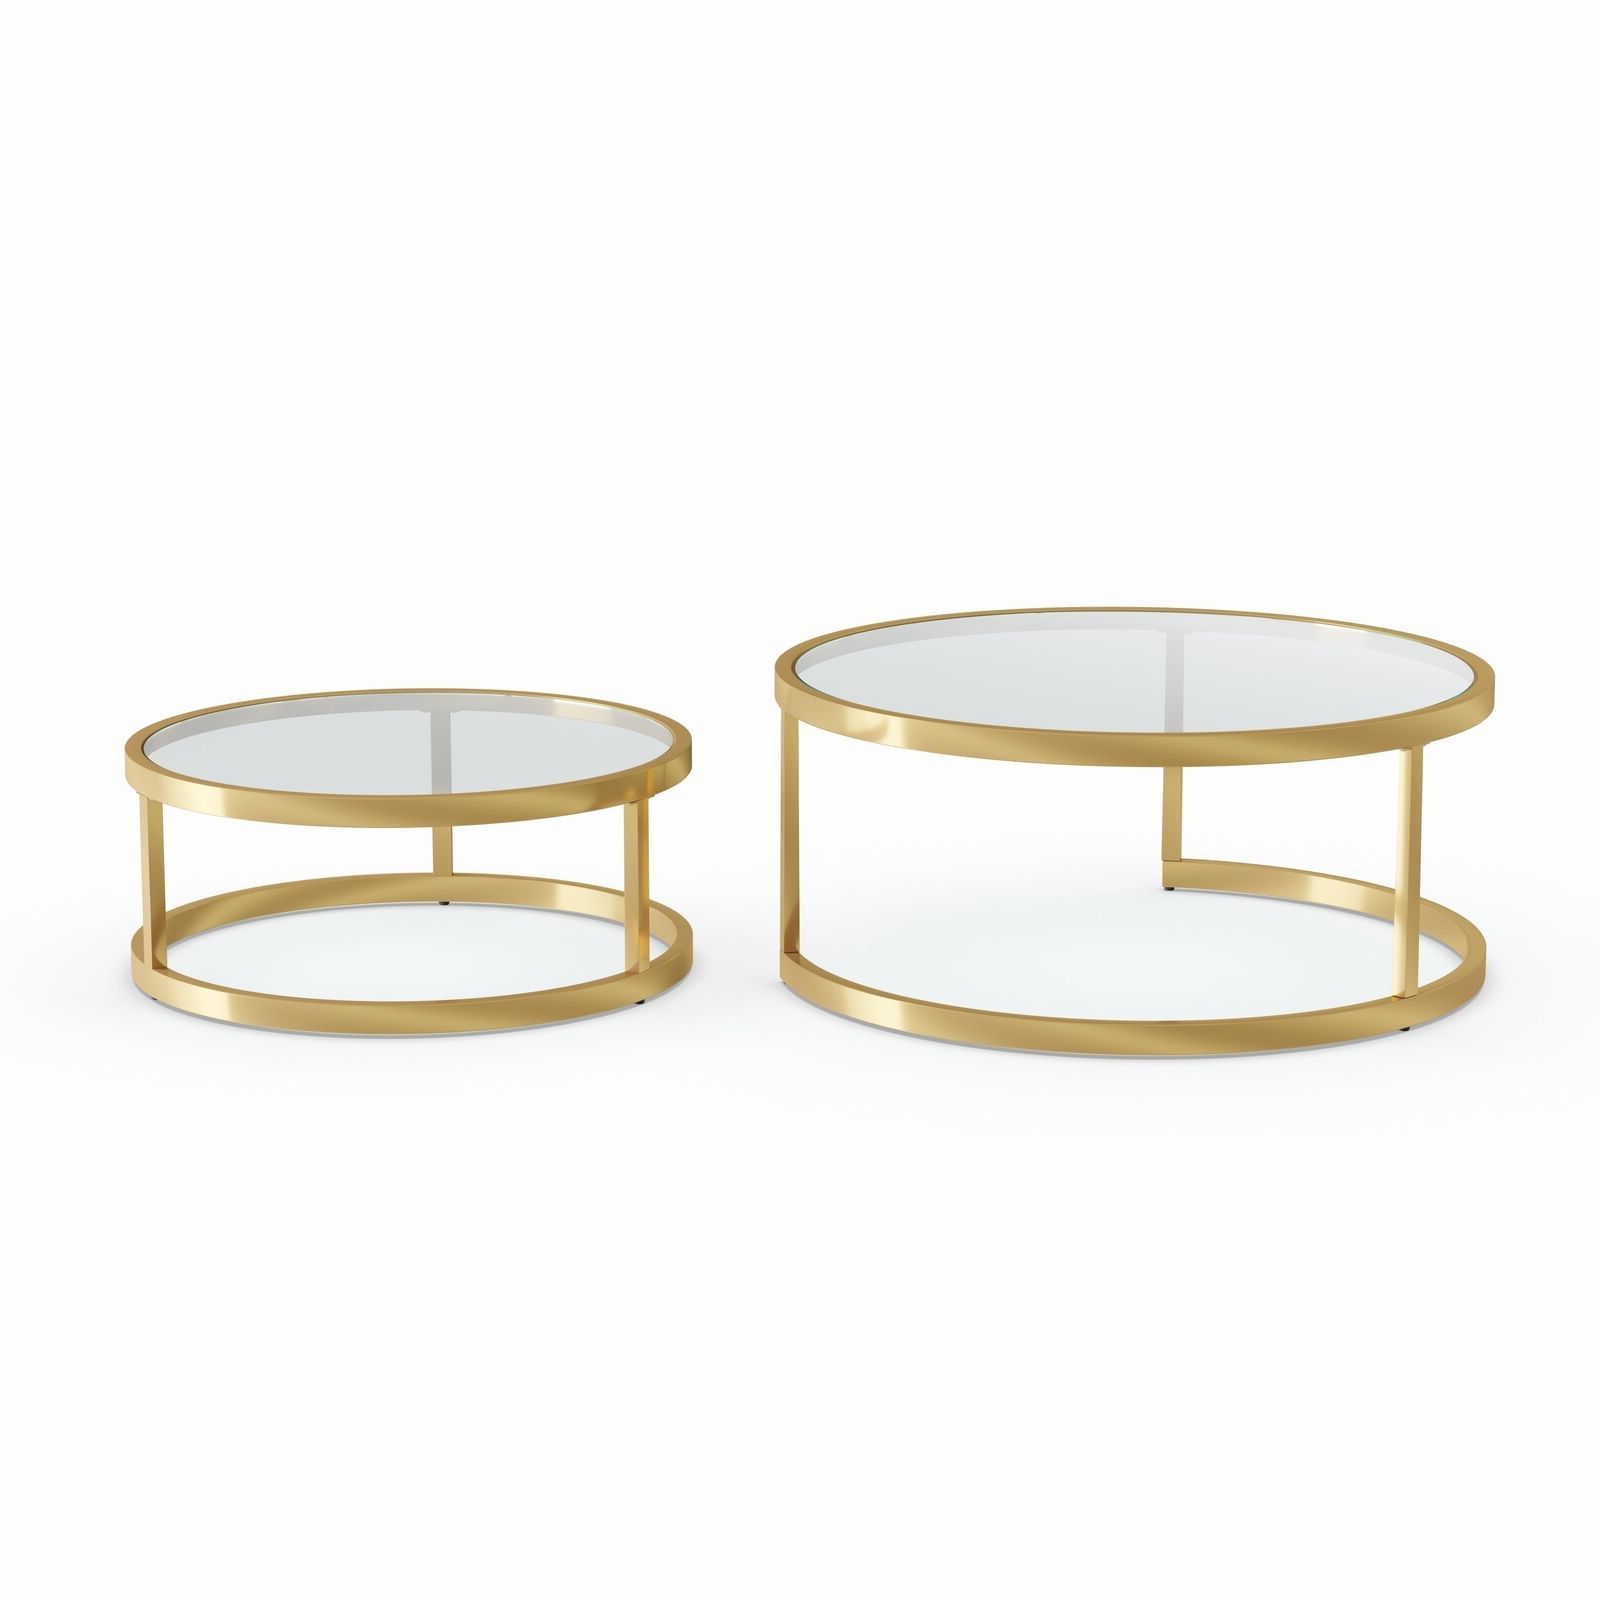 Well Known Silver Orchid Grant Glam Nesting Cocktail Tables Regarding Silver Orchid Grant Glam Nesting Cocktail Table 2 Piece Set (View 13 of 20)